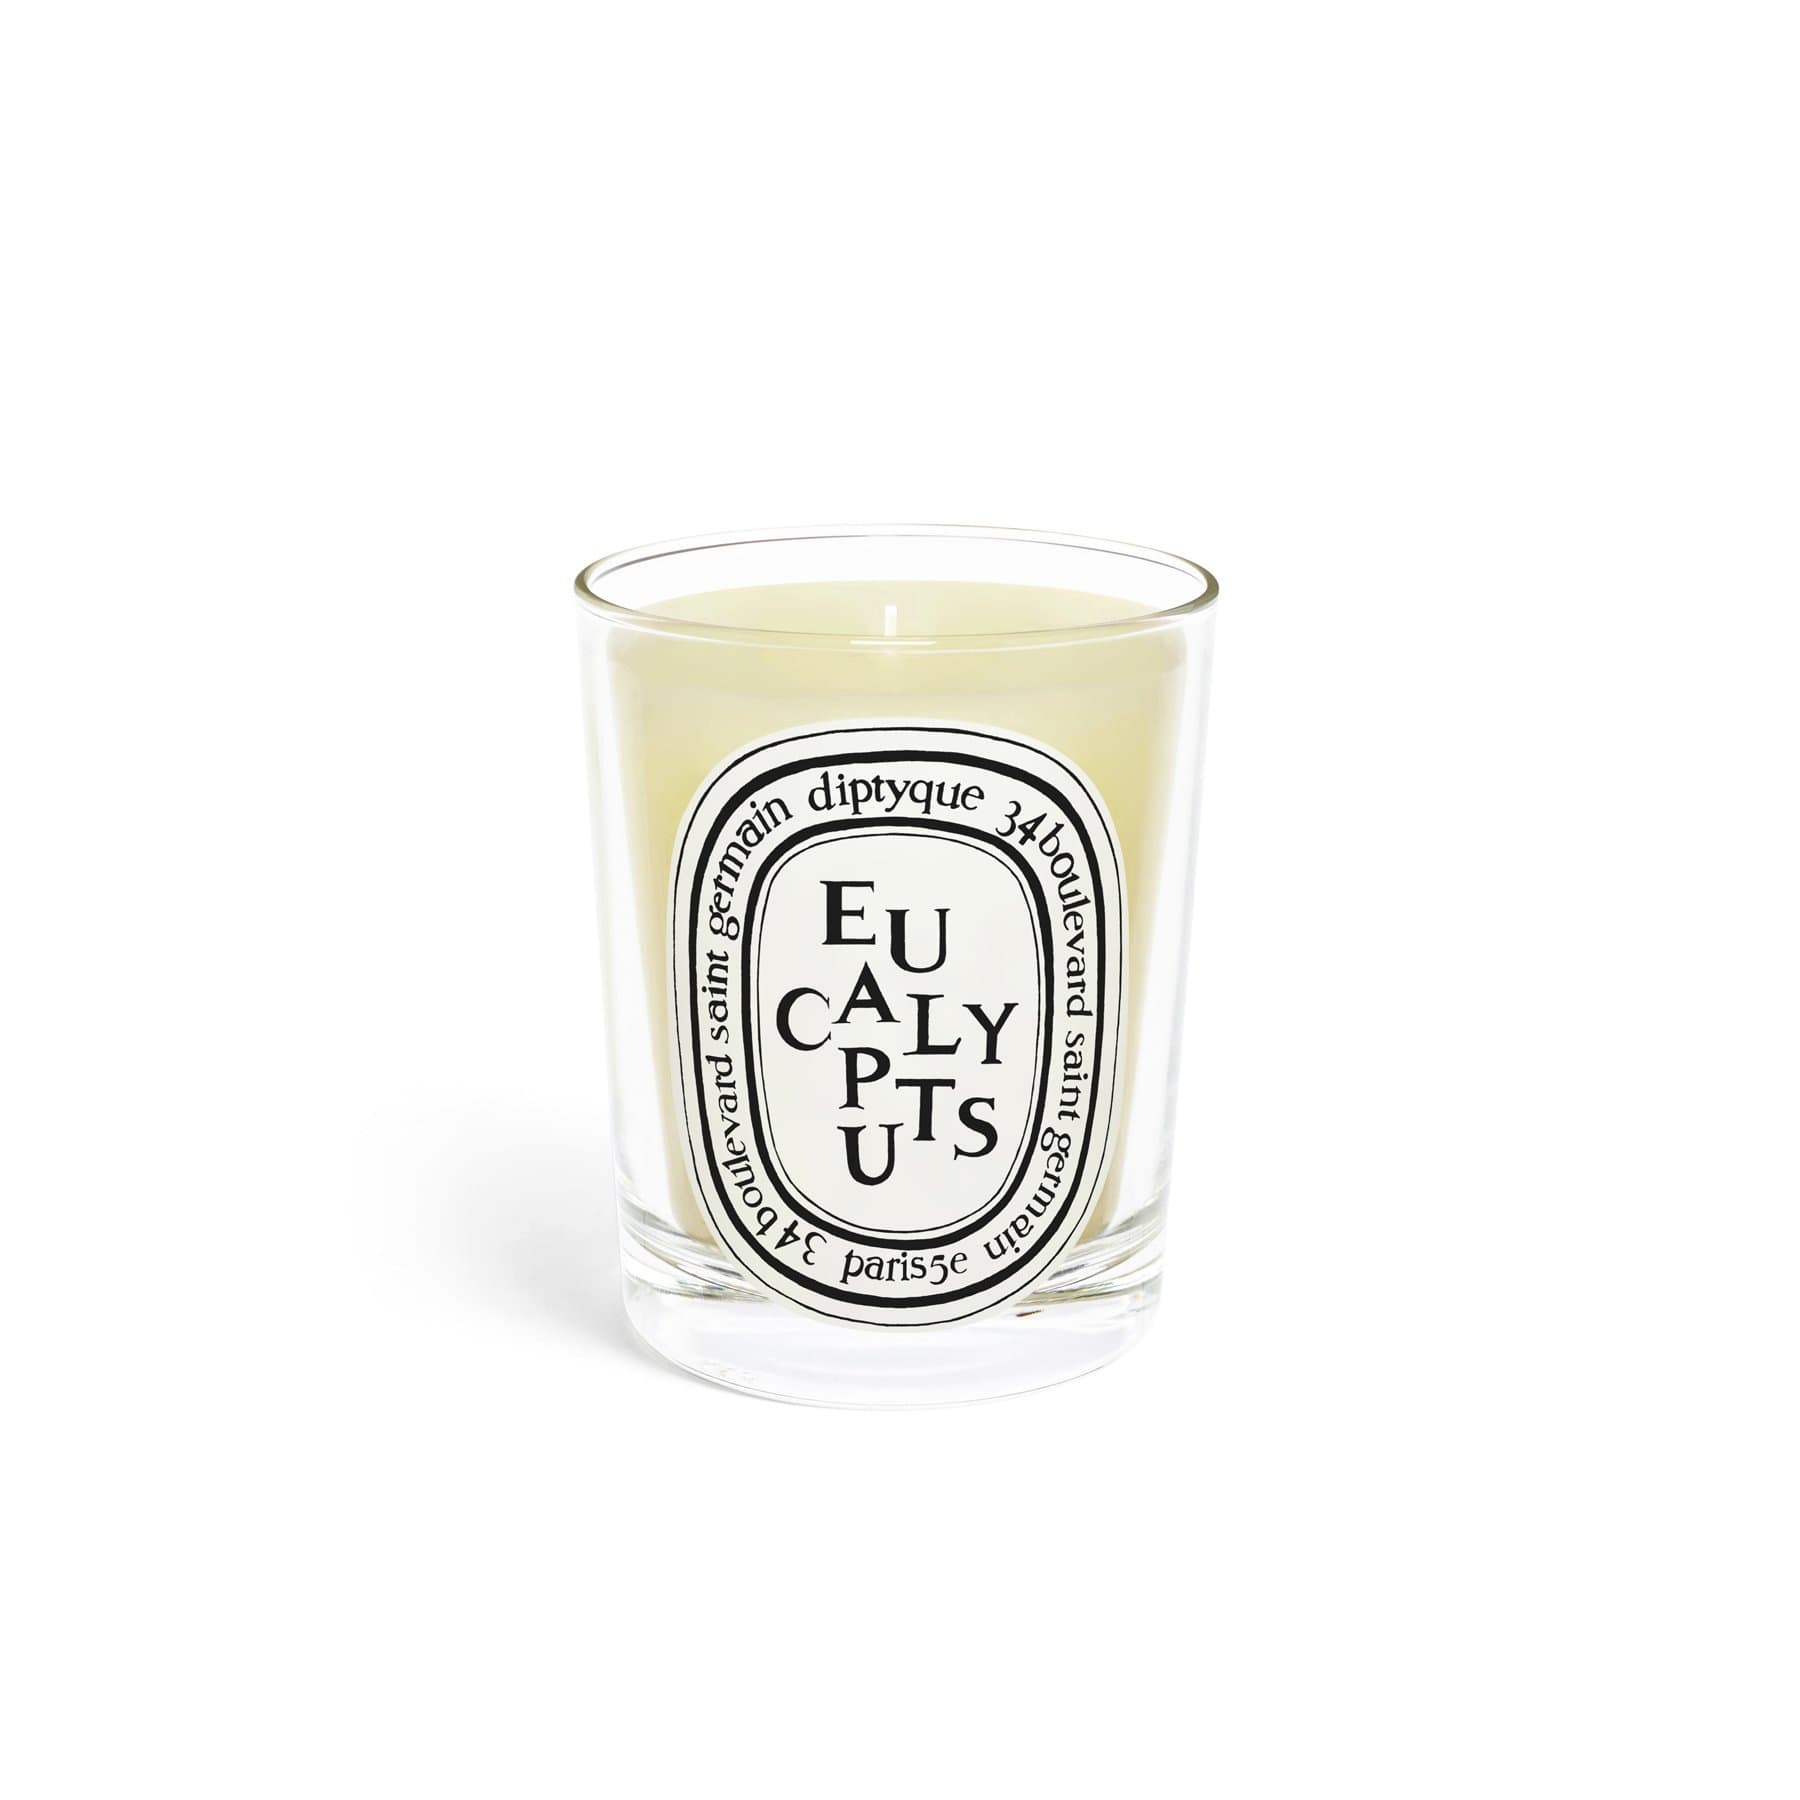 Eucalyptus Diptyque Scented candle